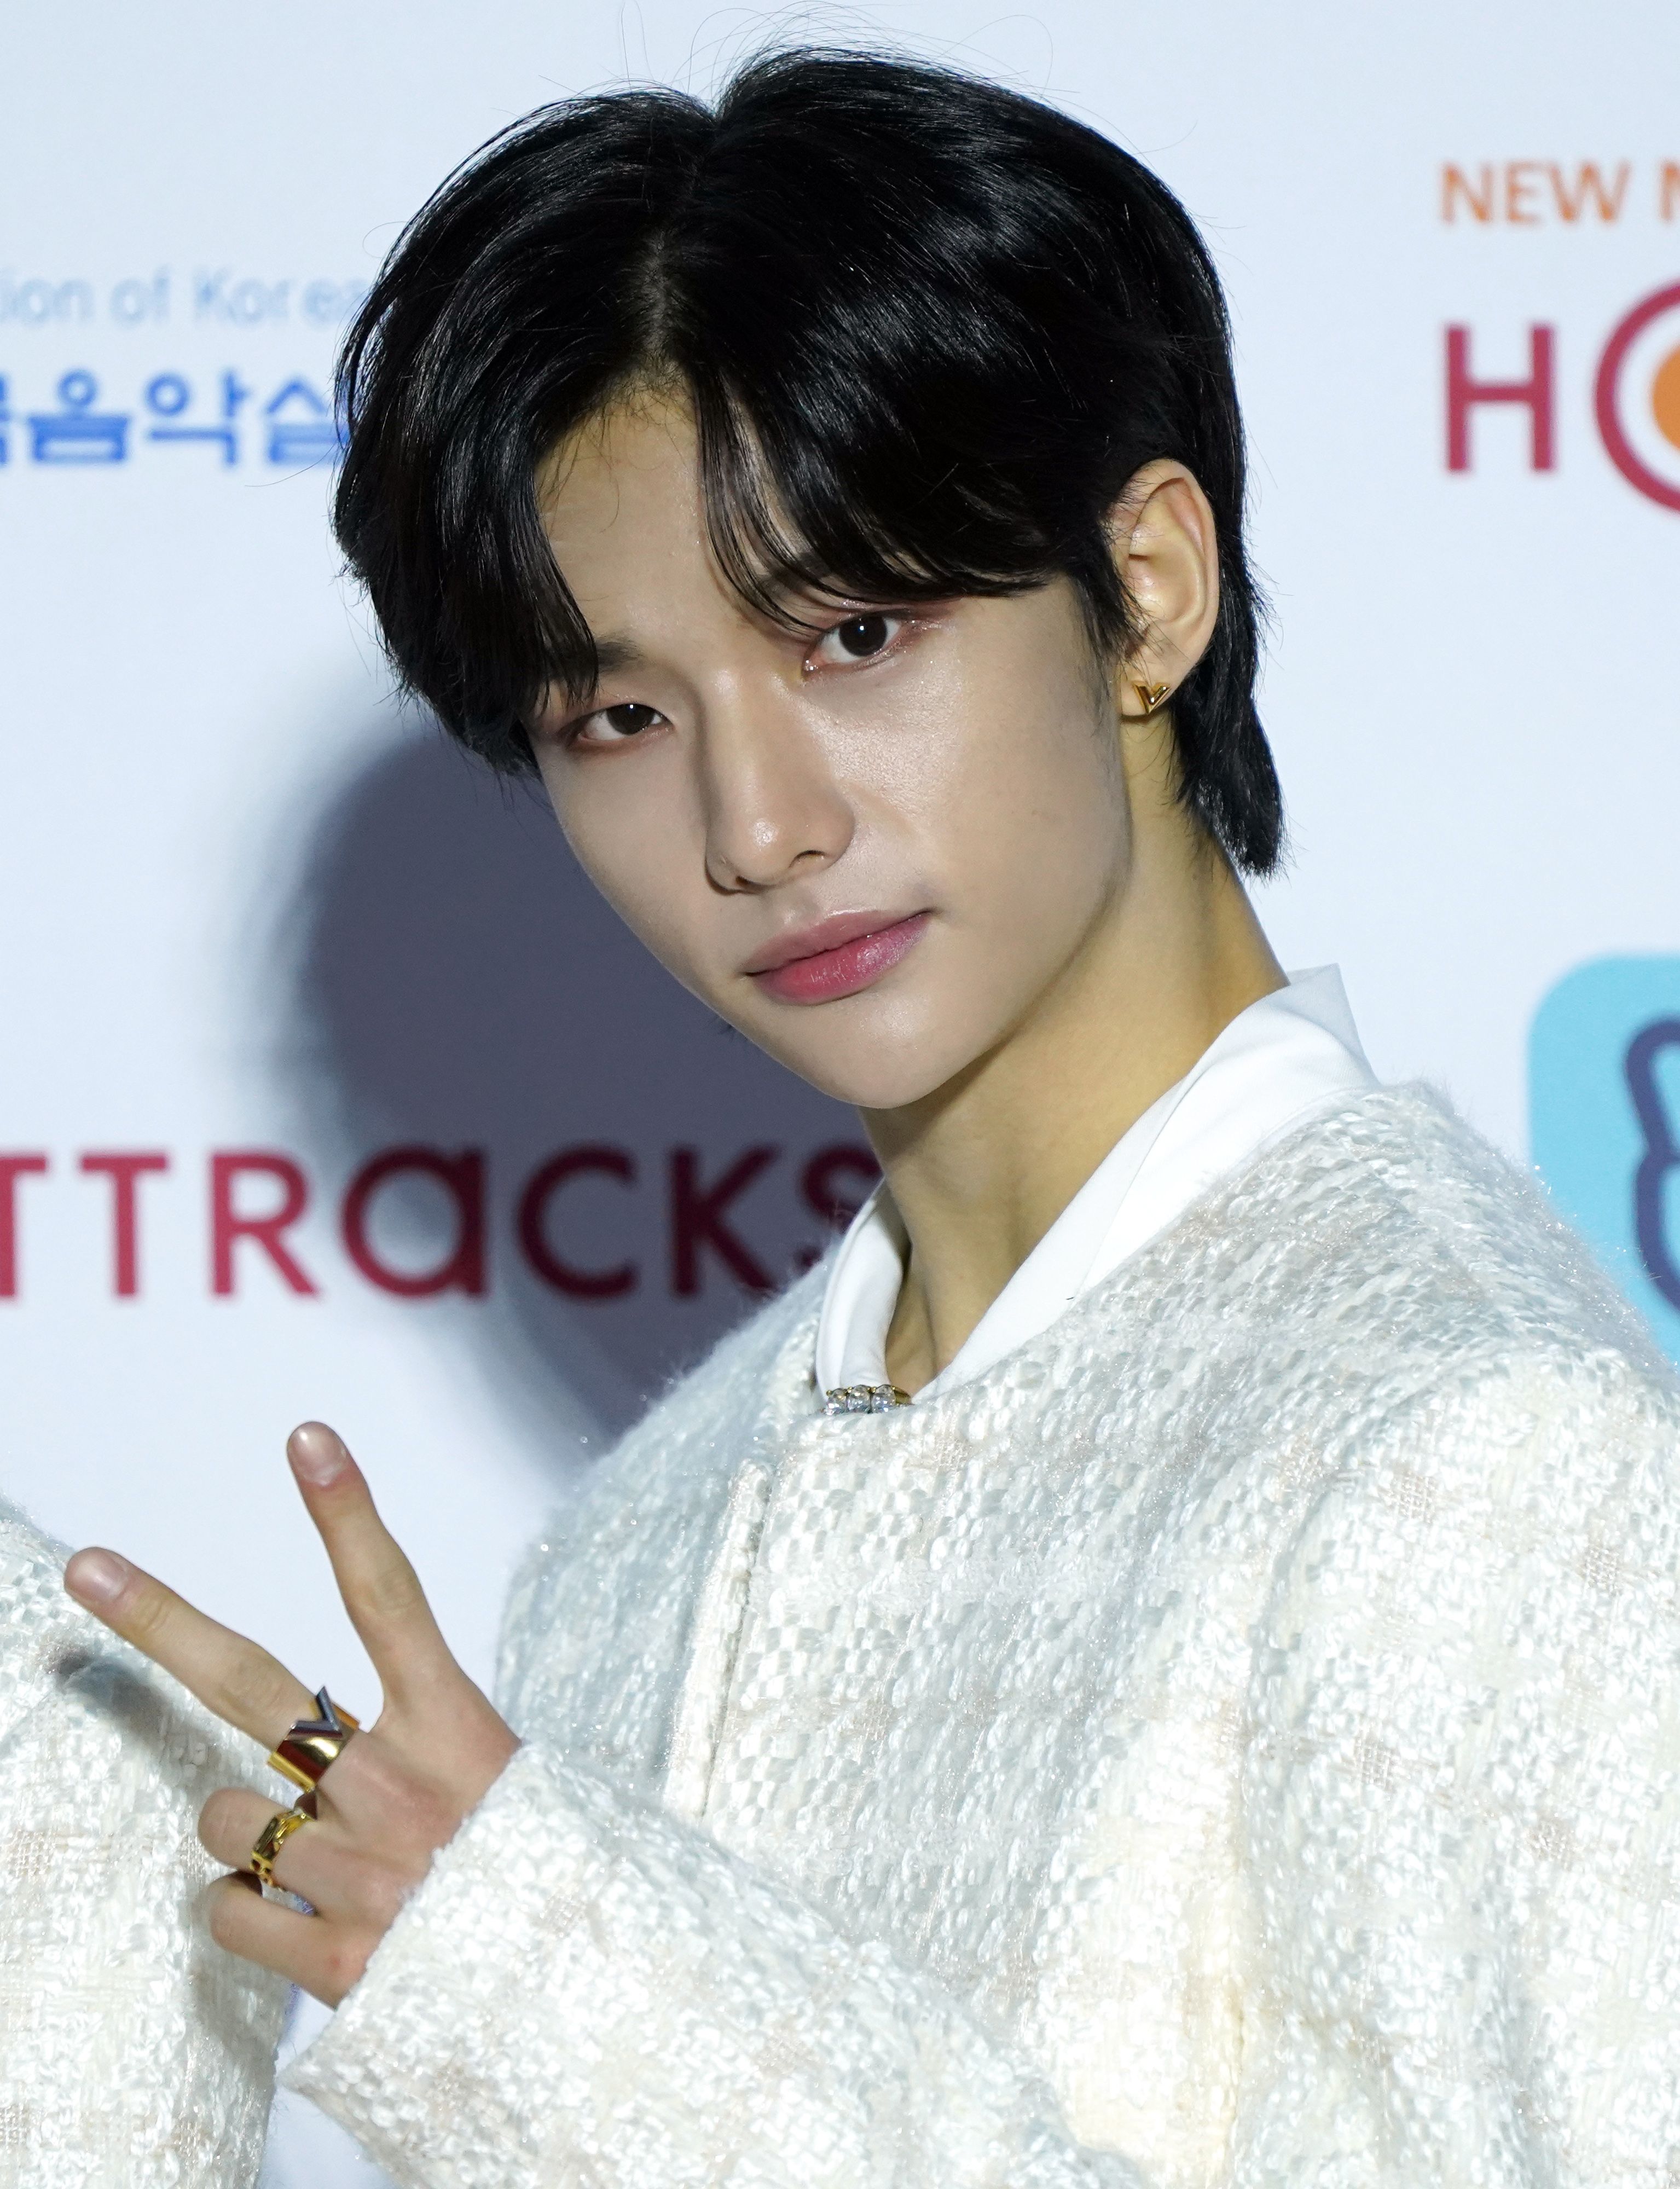 Hyunjin of Stray Kids is the First Korean Star to Become the